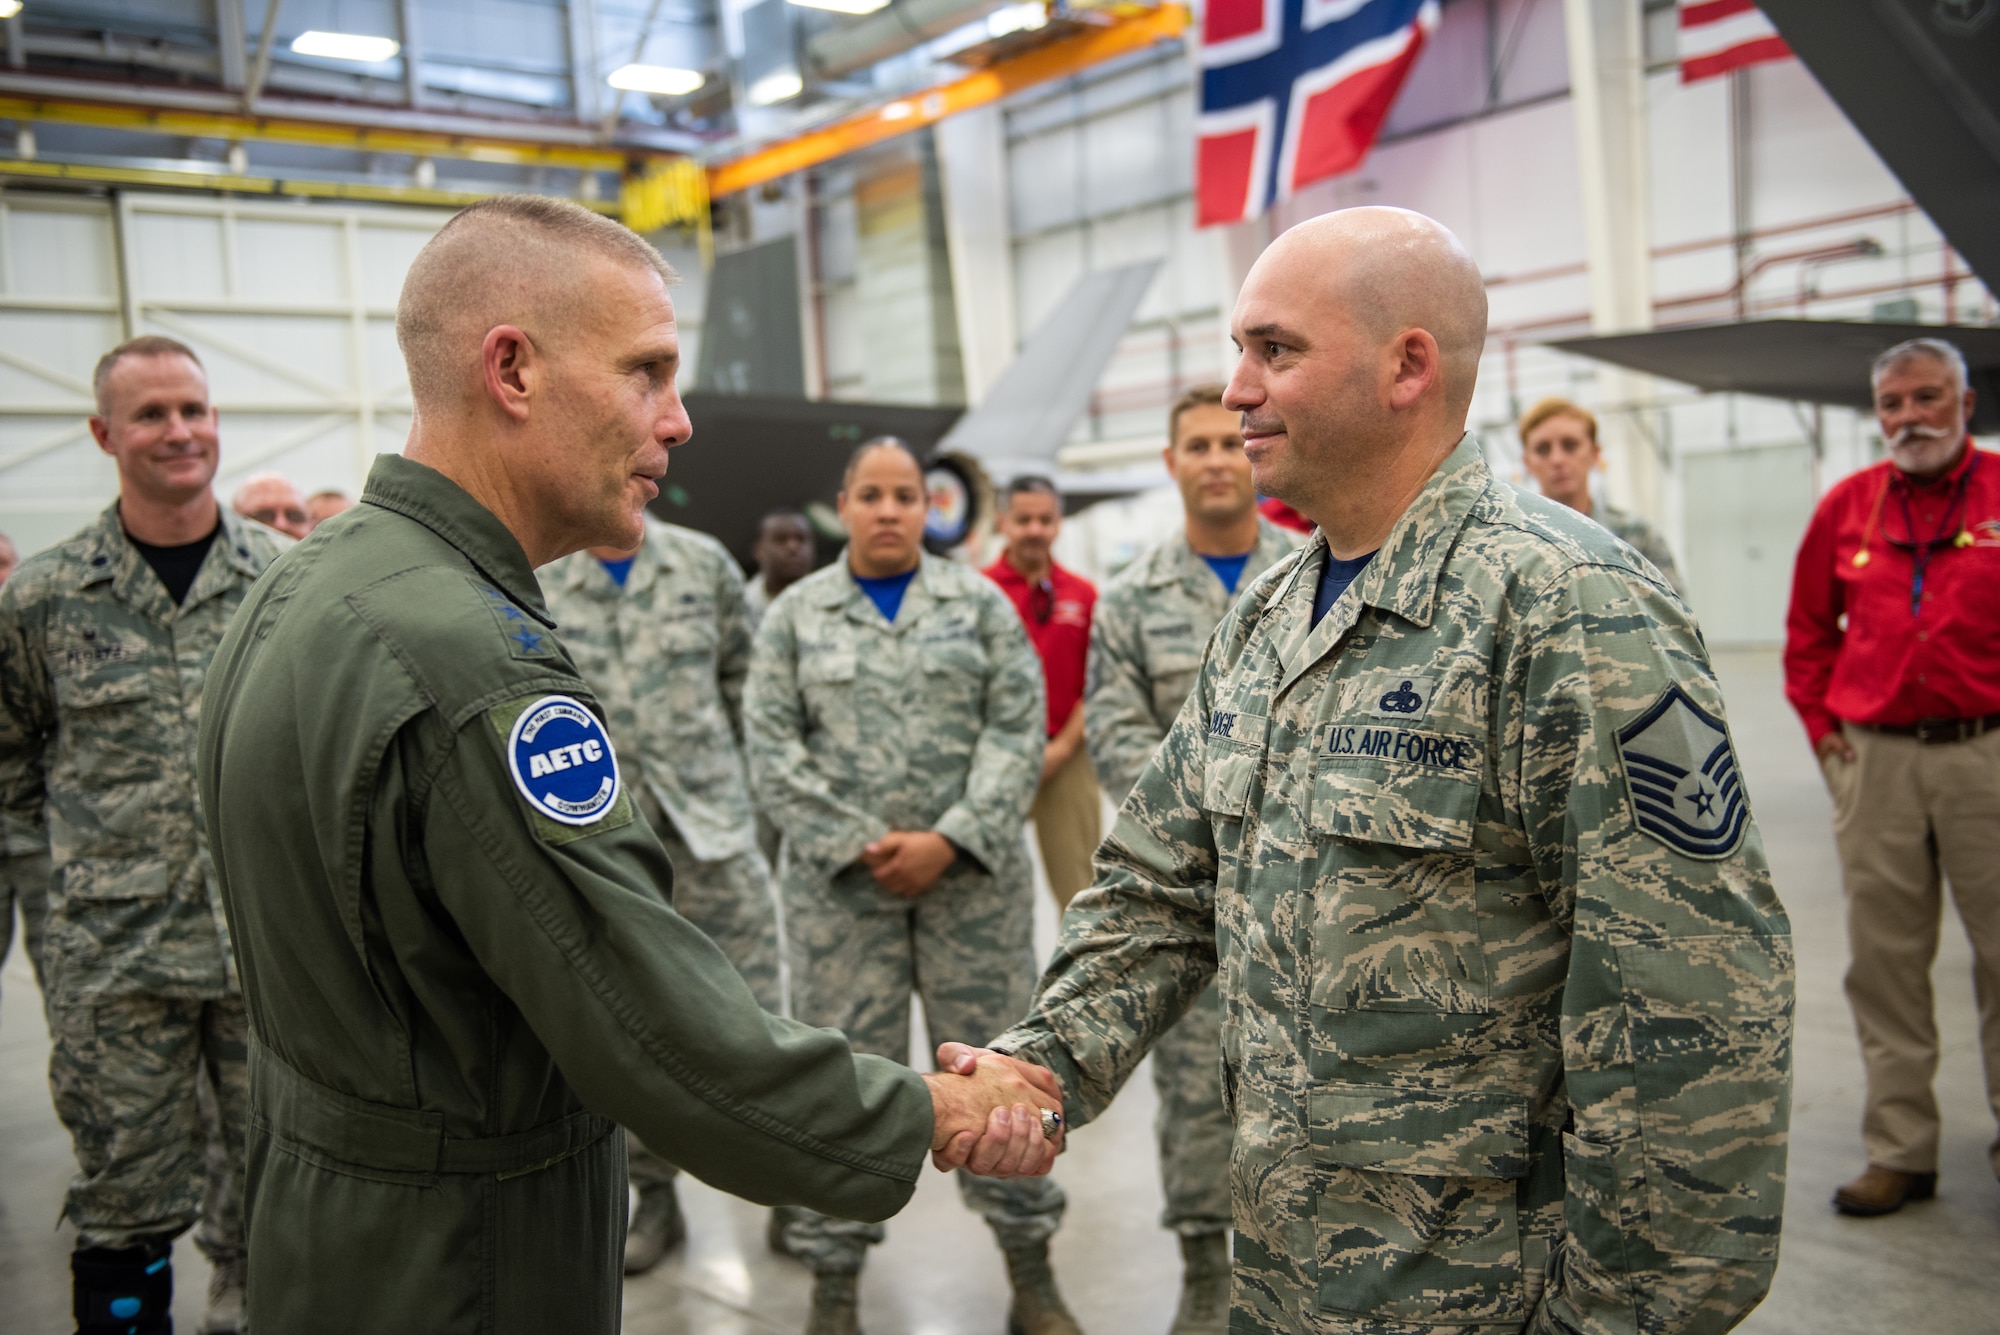 U.S. Air Force Lt. Gen. Steven Kwast, commander of Air Education and Training Command, meets with an Airman assigned to the 56th Fighter Wing at Luke Air Force Base, Arizona during a visit July 20, 2018.  Kwast, a U.S. Air Force Academy graduate, will pass command of AETC to Lt. Gen. Brad Webb July 26, 2019. (U.S. Air Force photo / Courtesy)